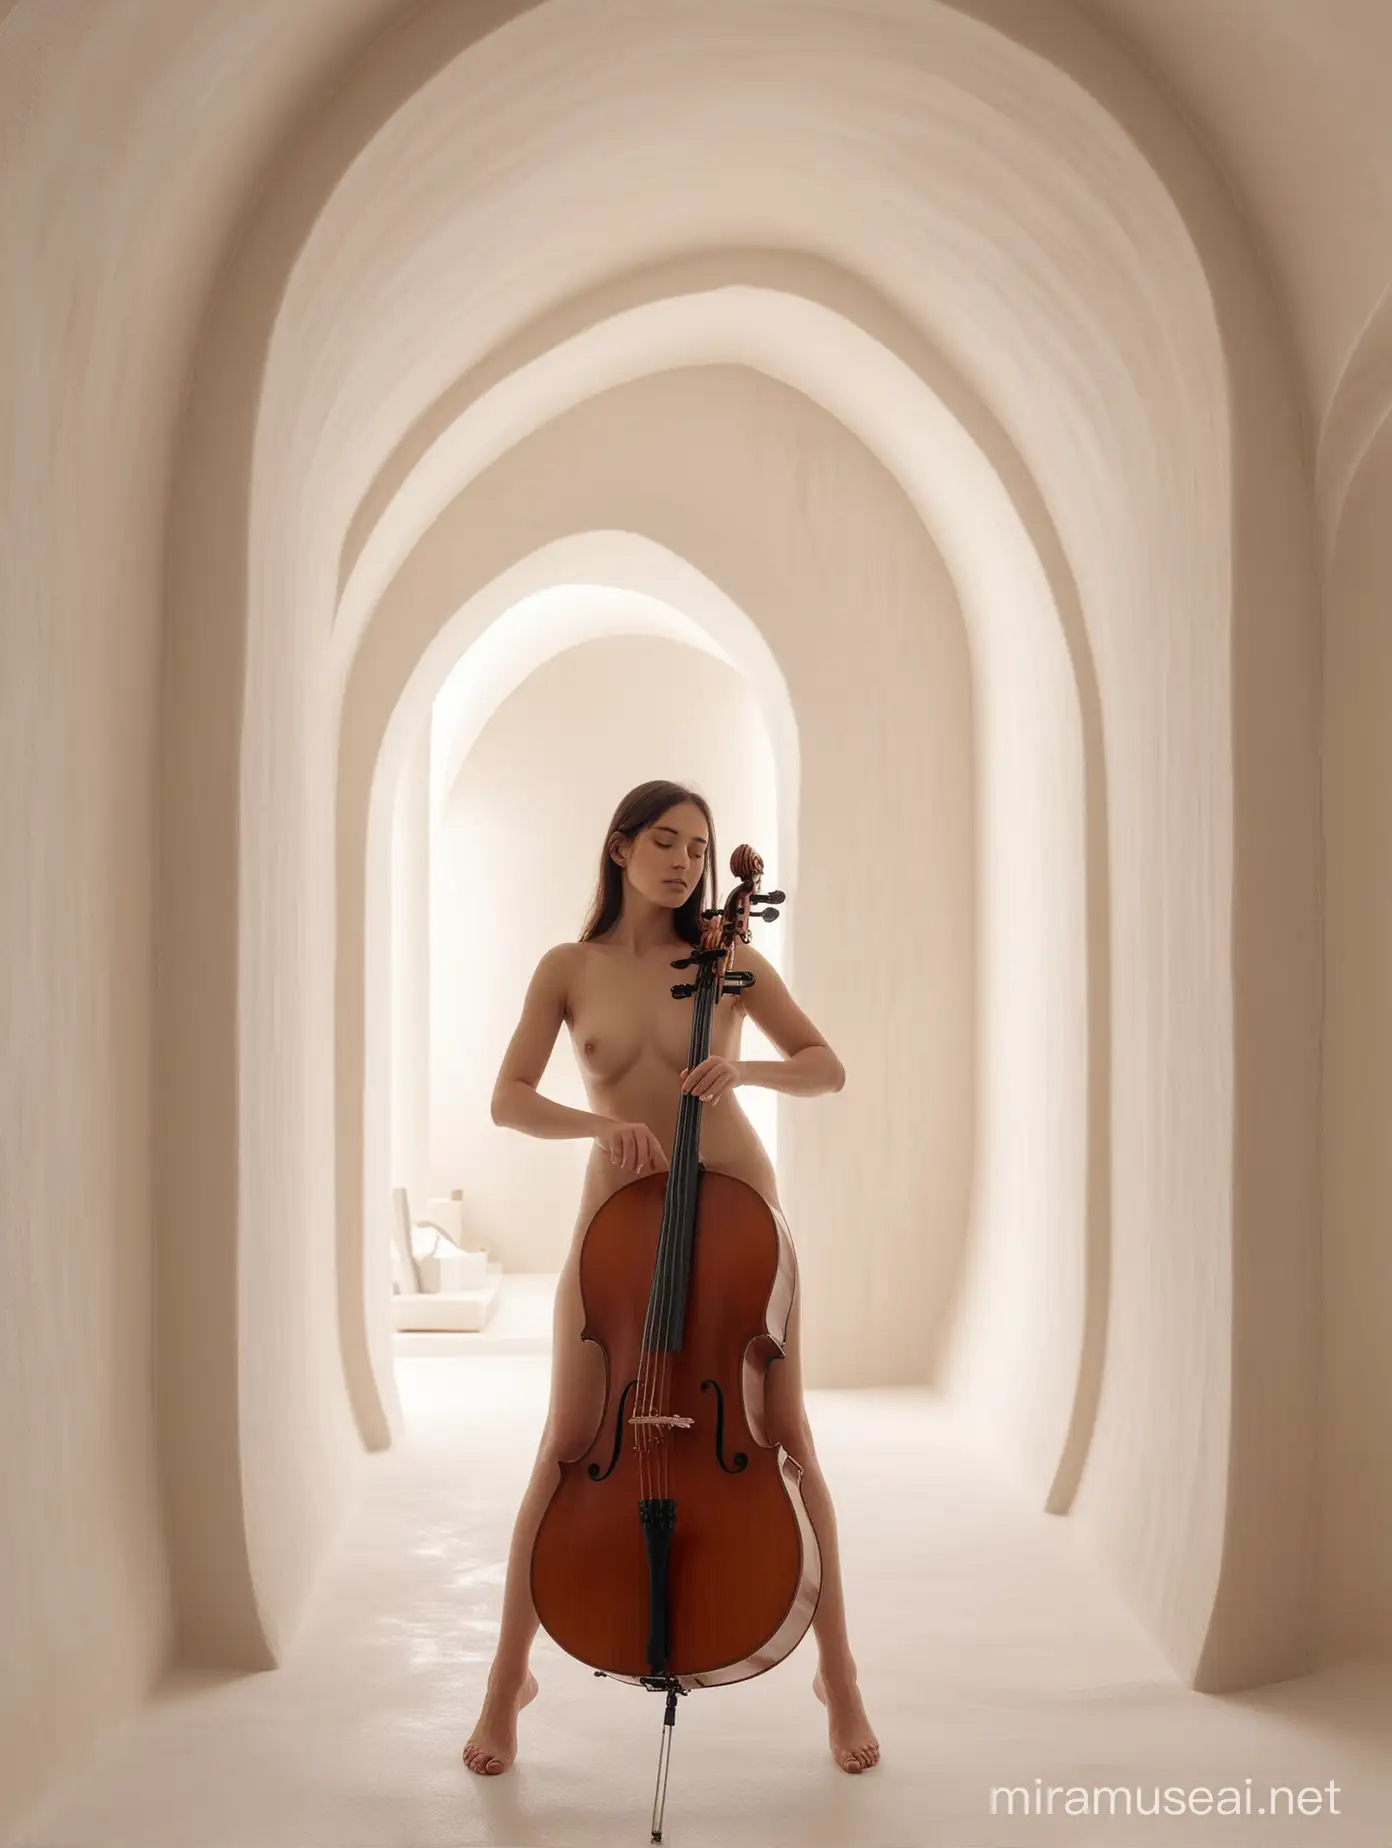 Naked Woman Playing Cello in Minimalist Dome Space